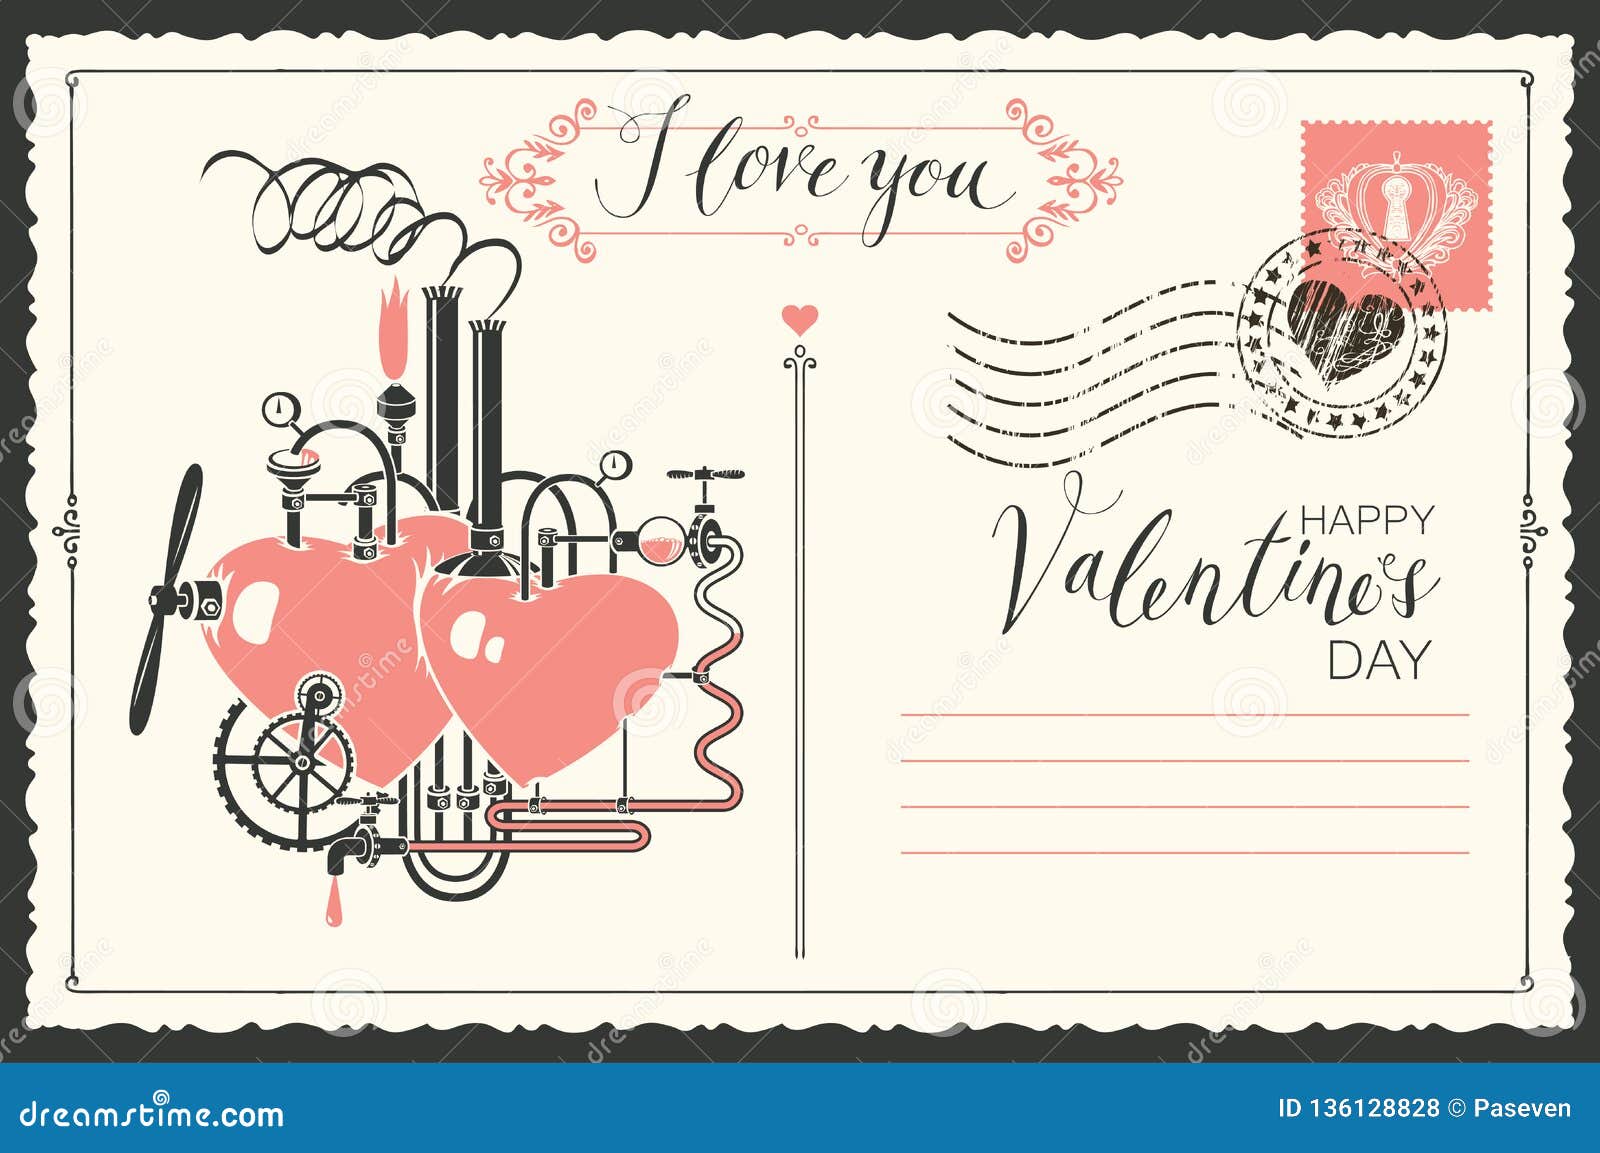 https://thumbs.dreamstime.com/z/vintage-postcard-theme-declaration-love-valentine-card-form-two-hearts-connected-different-mechanisms-pipes-136128828.jpg